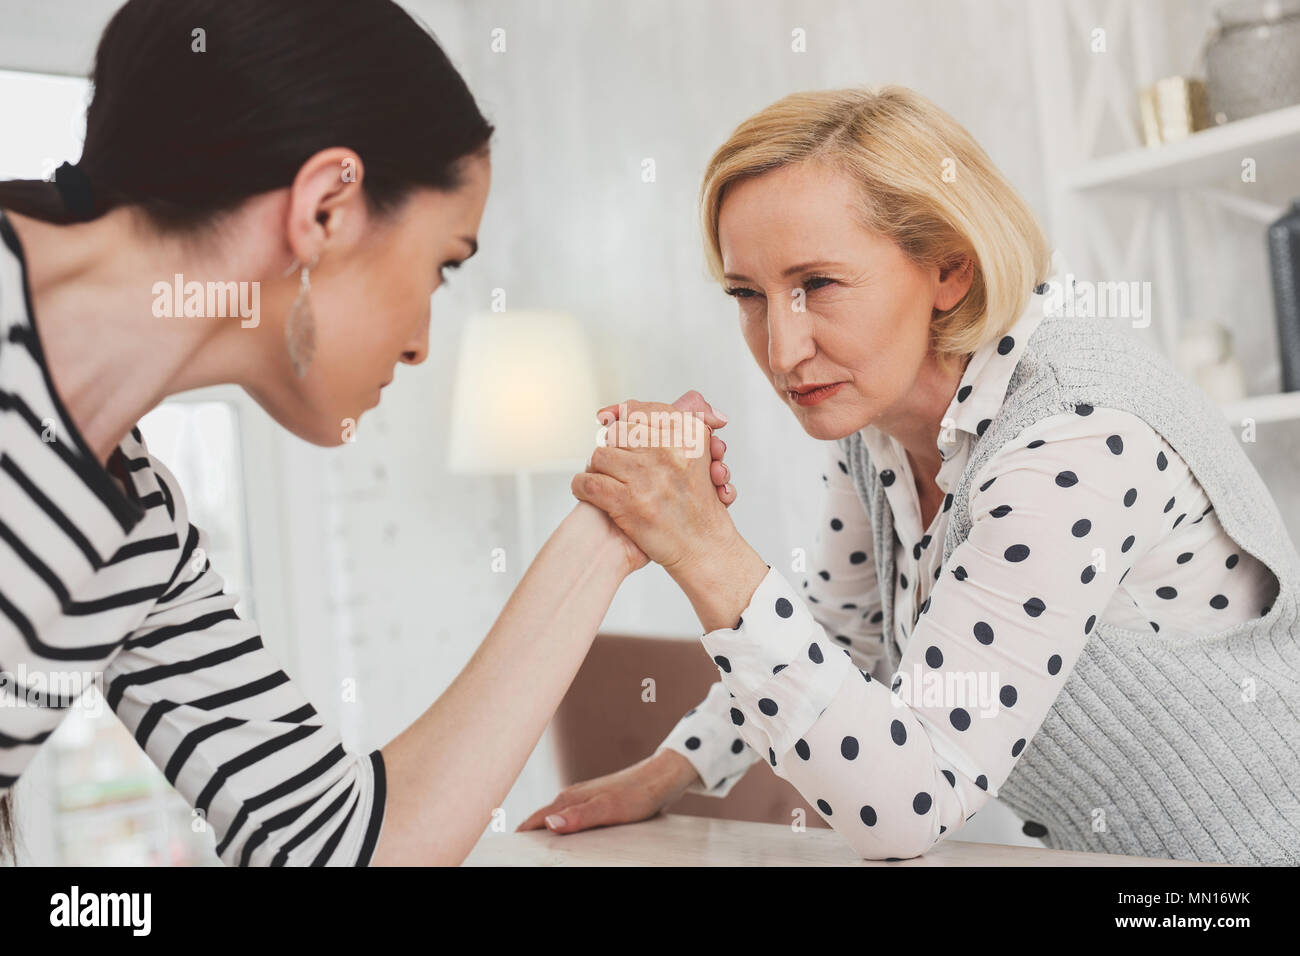 Serious concentrated woman looking at her daughter in law Stock Photo